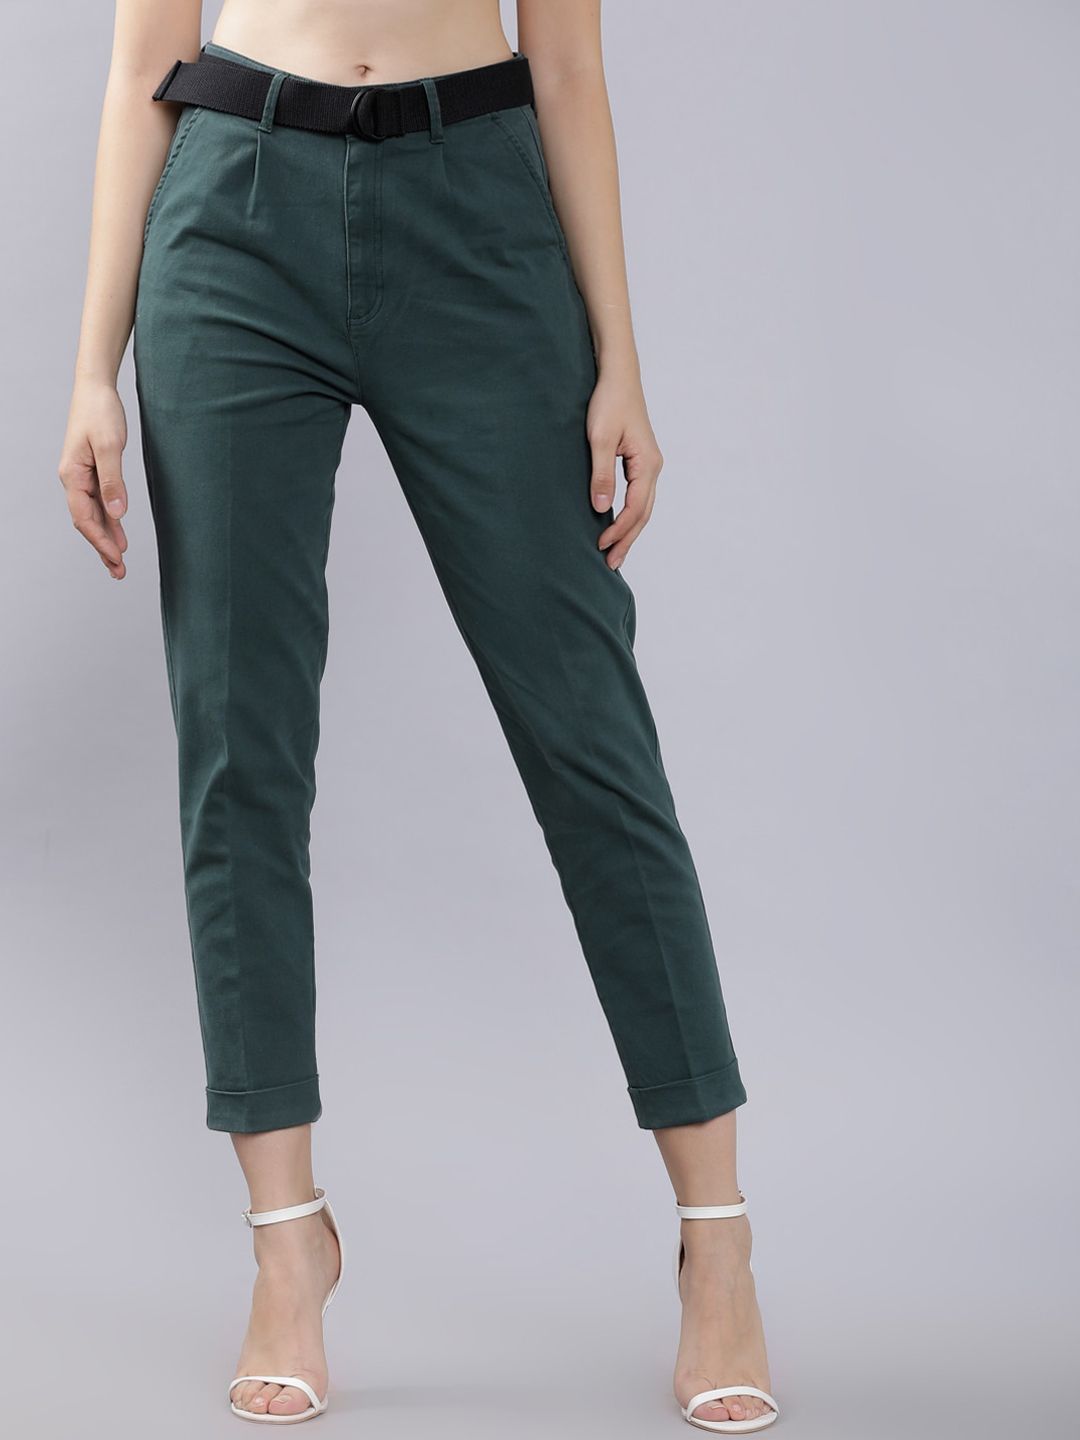 Tokyo Talkies Women Teal Green Regular Fit Solid Cropped Peg Trousers Price in India